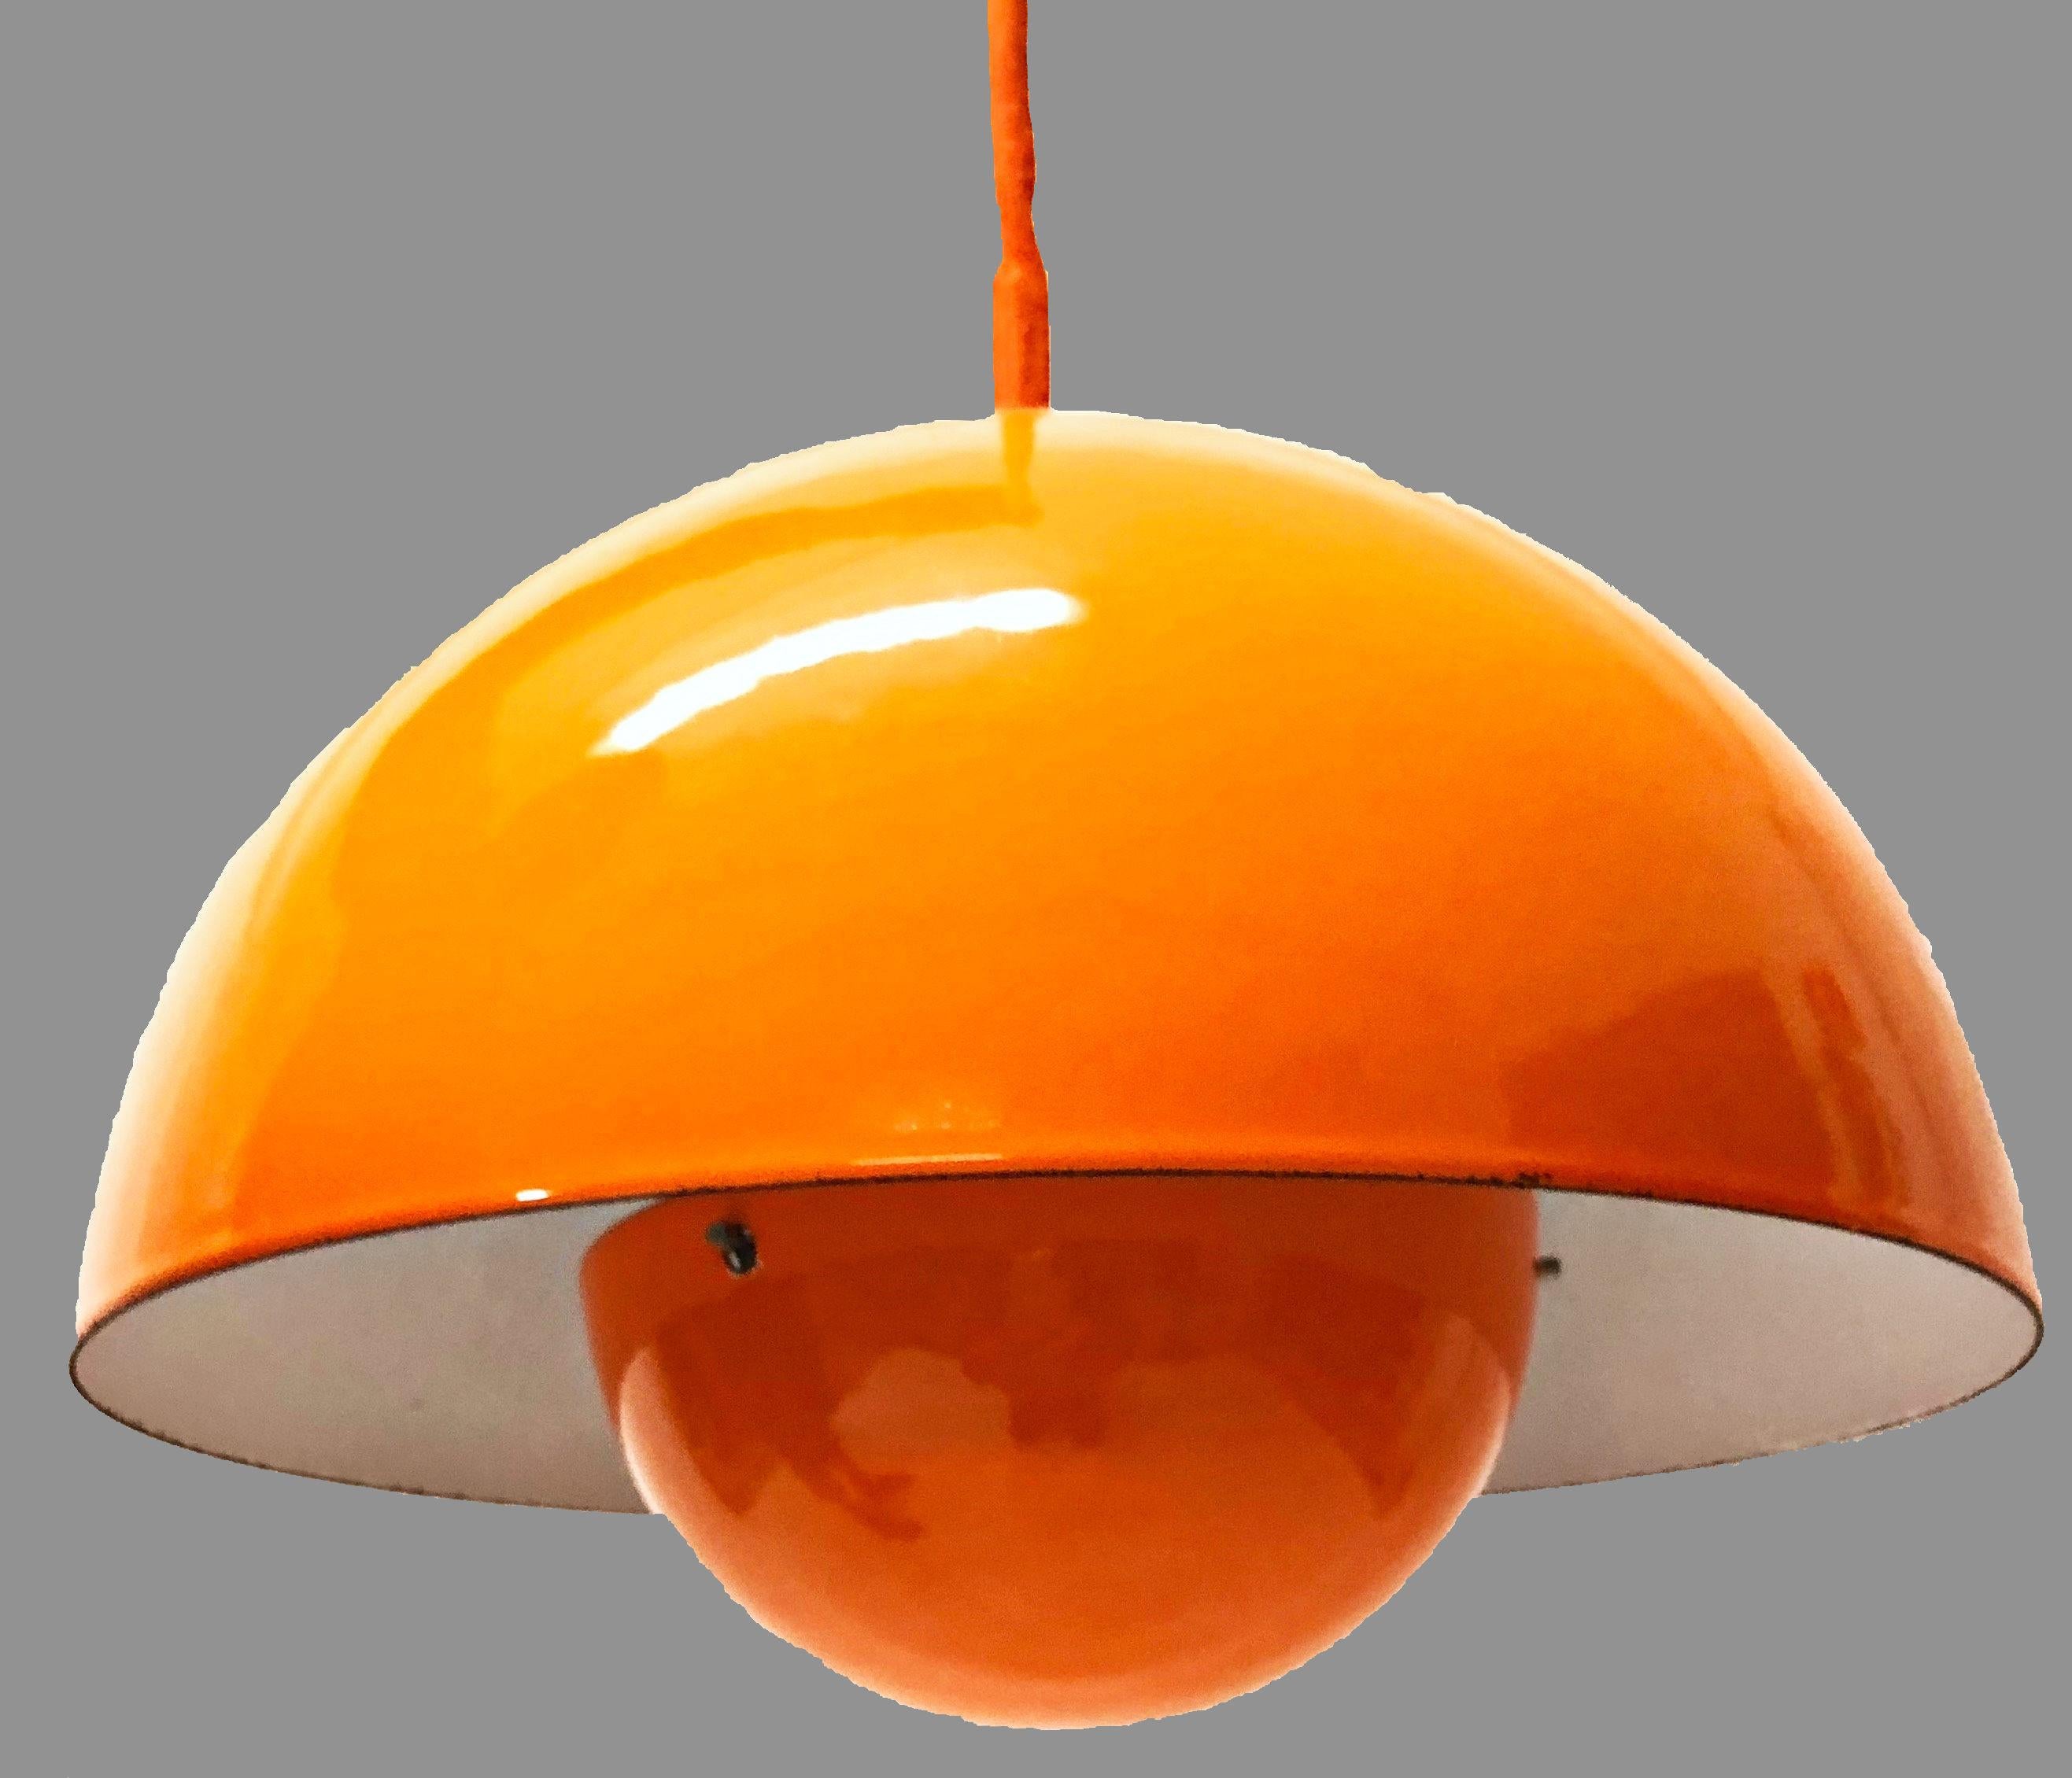 Verner Panton flowerpot pendant light designed for Louis Poulsen in 1969.

This pendant is an early example of the Panton flowerpot model and feature an orange enamel lampshade consisting of two semi-circular spheres facing each other.

The